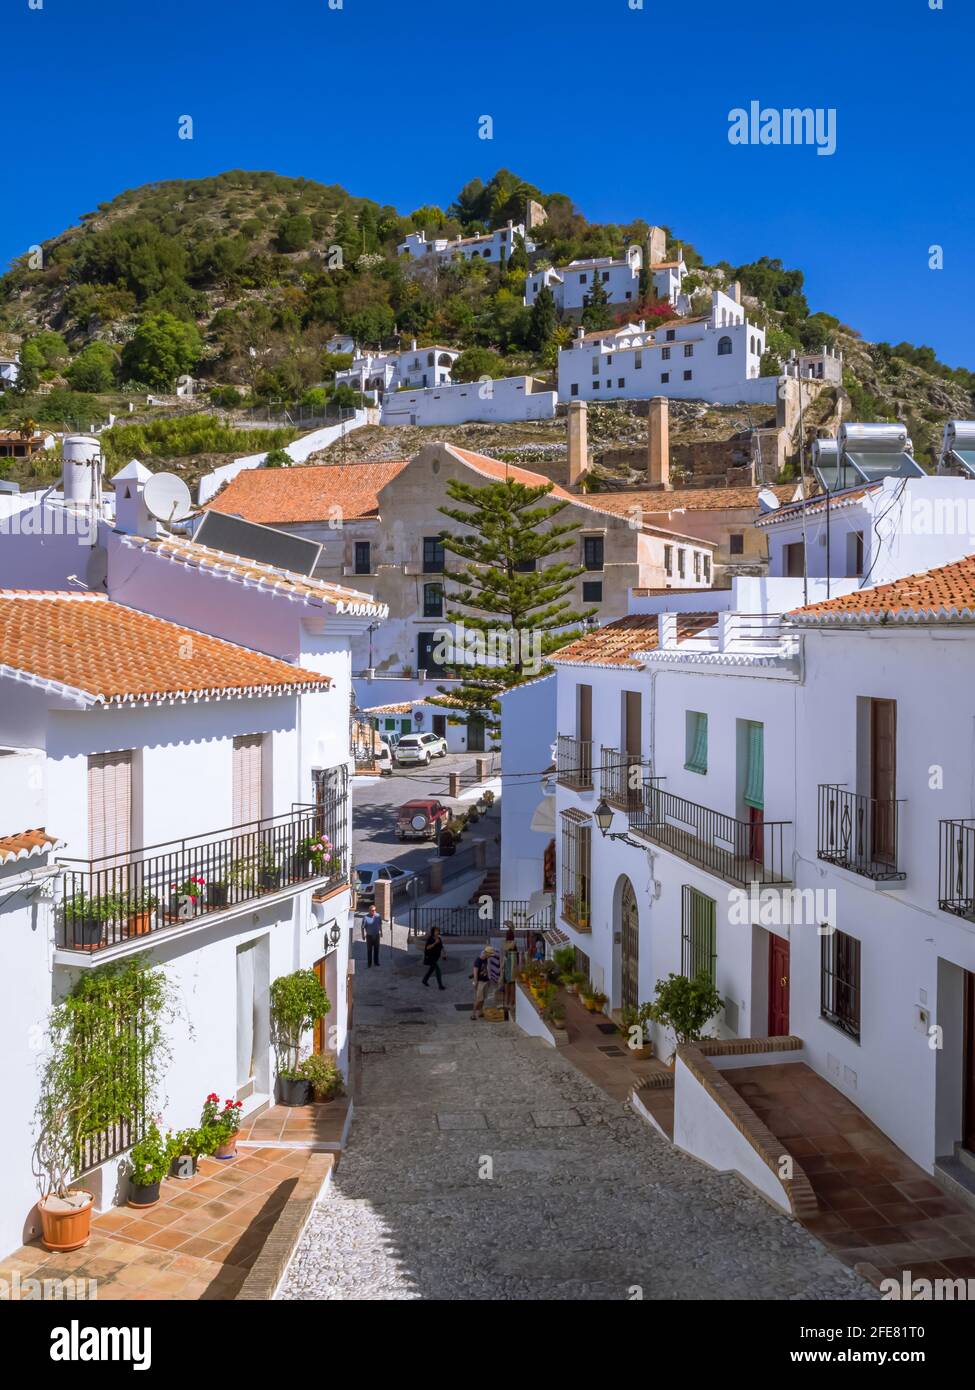 A typical street in the Moorish hillside village of Frigiliana in Andalusia Spain. Stock Photo